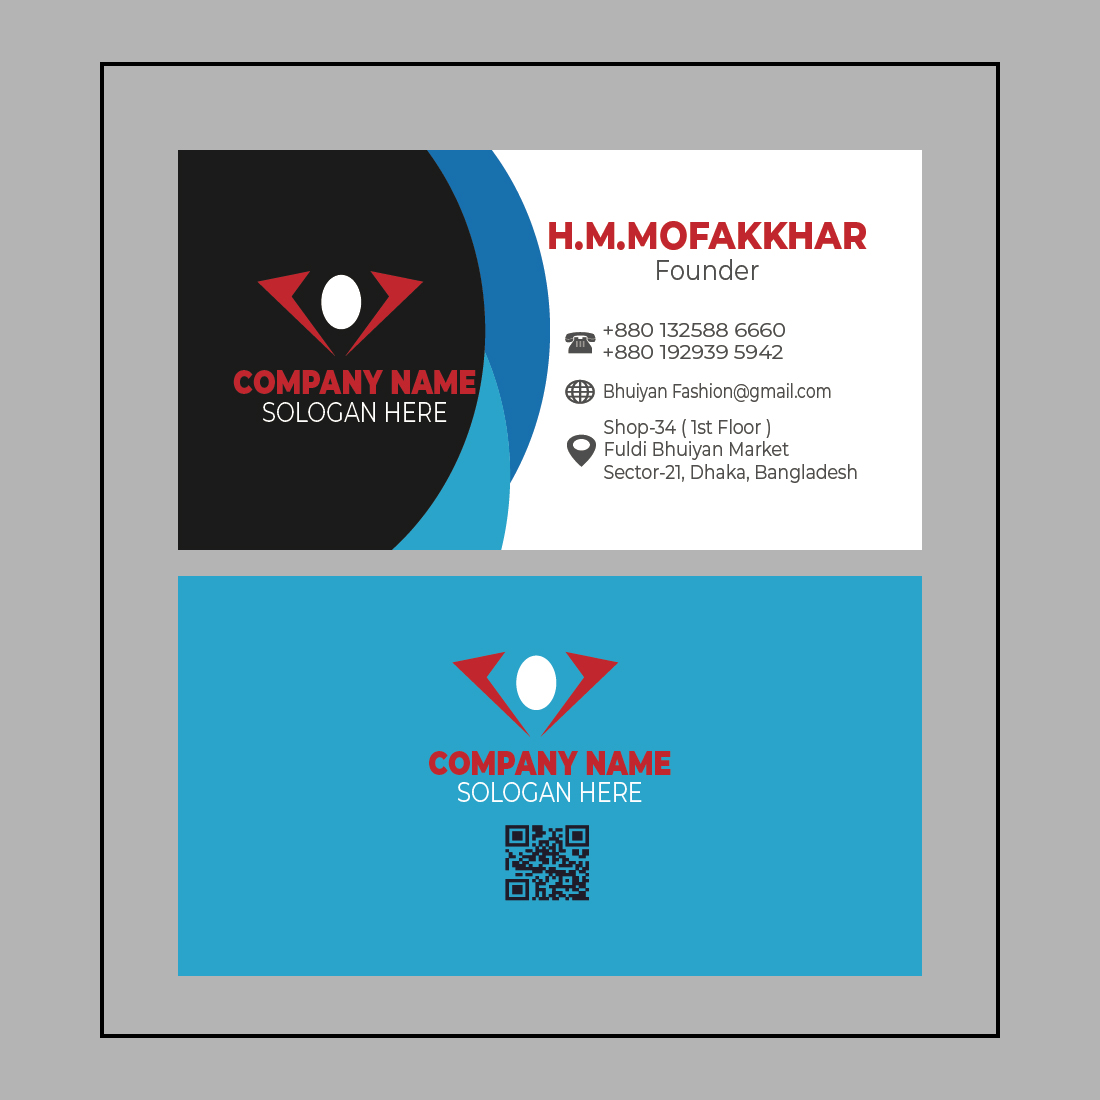 A clean & Modern Business Card cover image.